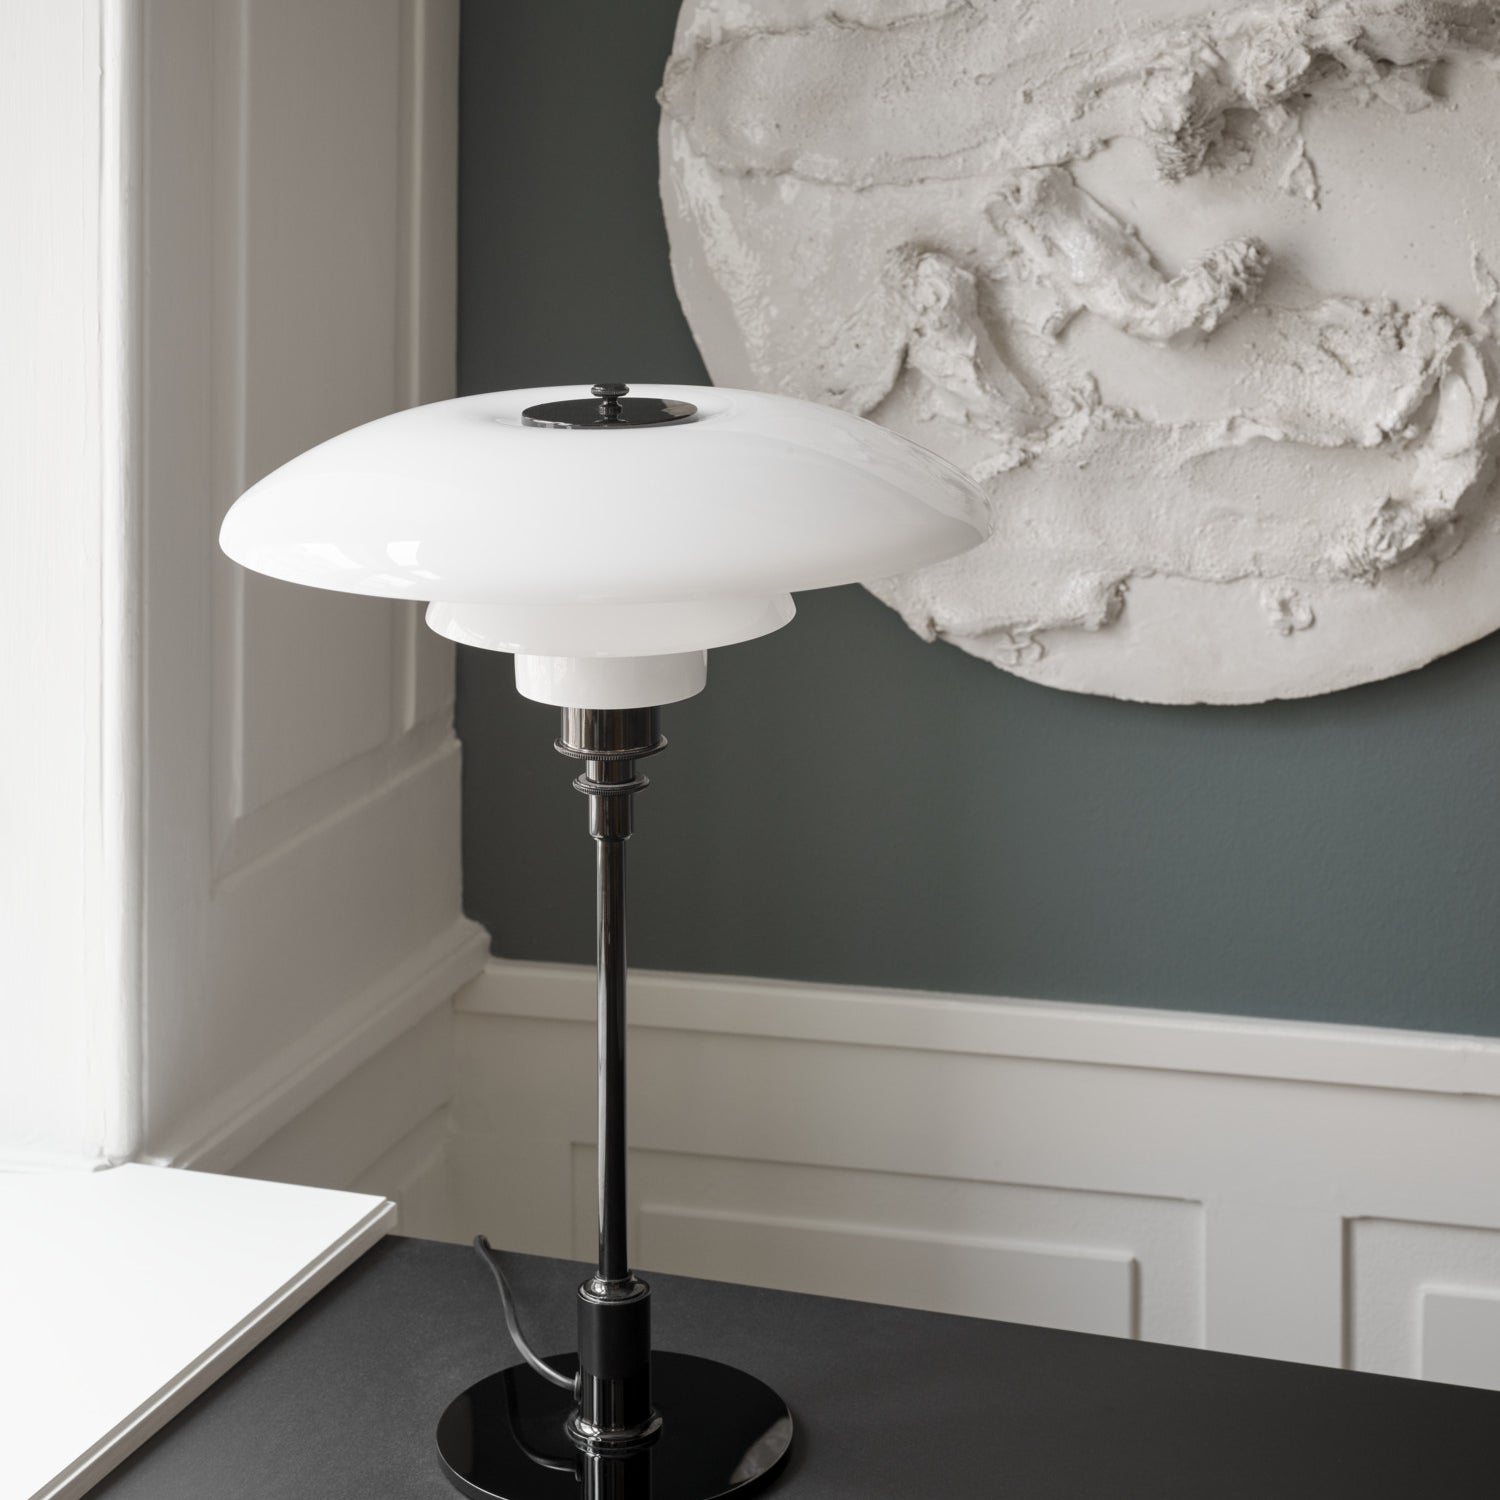 The PH 3½-2½ glass table lamp is designed based on the principle of a reflective three-shade system, which directs the majority of the light downwards. The shades are made of hand blown opal three-layer glass, which is glossy on top and sandblasted matte on the underside, giving a soft and diffused light distribution. Designed by Poul Henningsen.